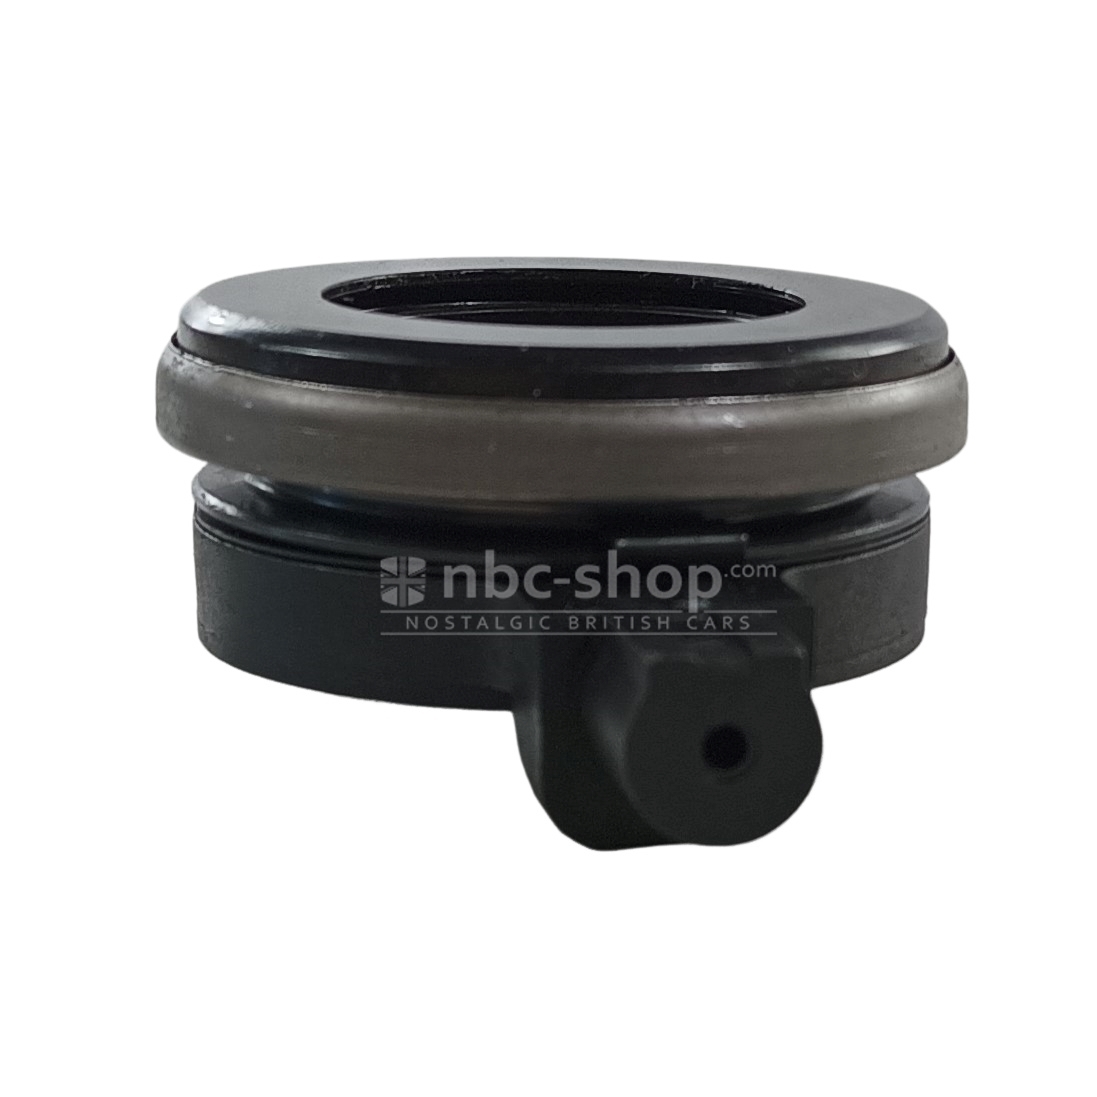 GRB106RK BUTEE D’EMBRAYAGE A ROULEMENT MGB nbc-shop 4